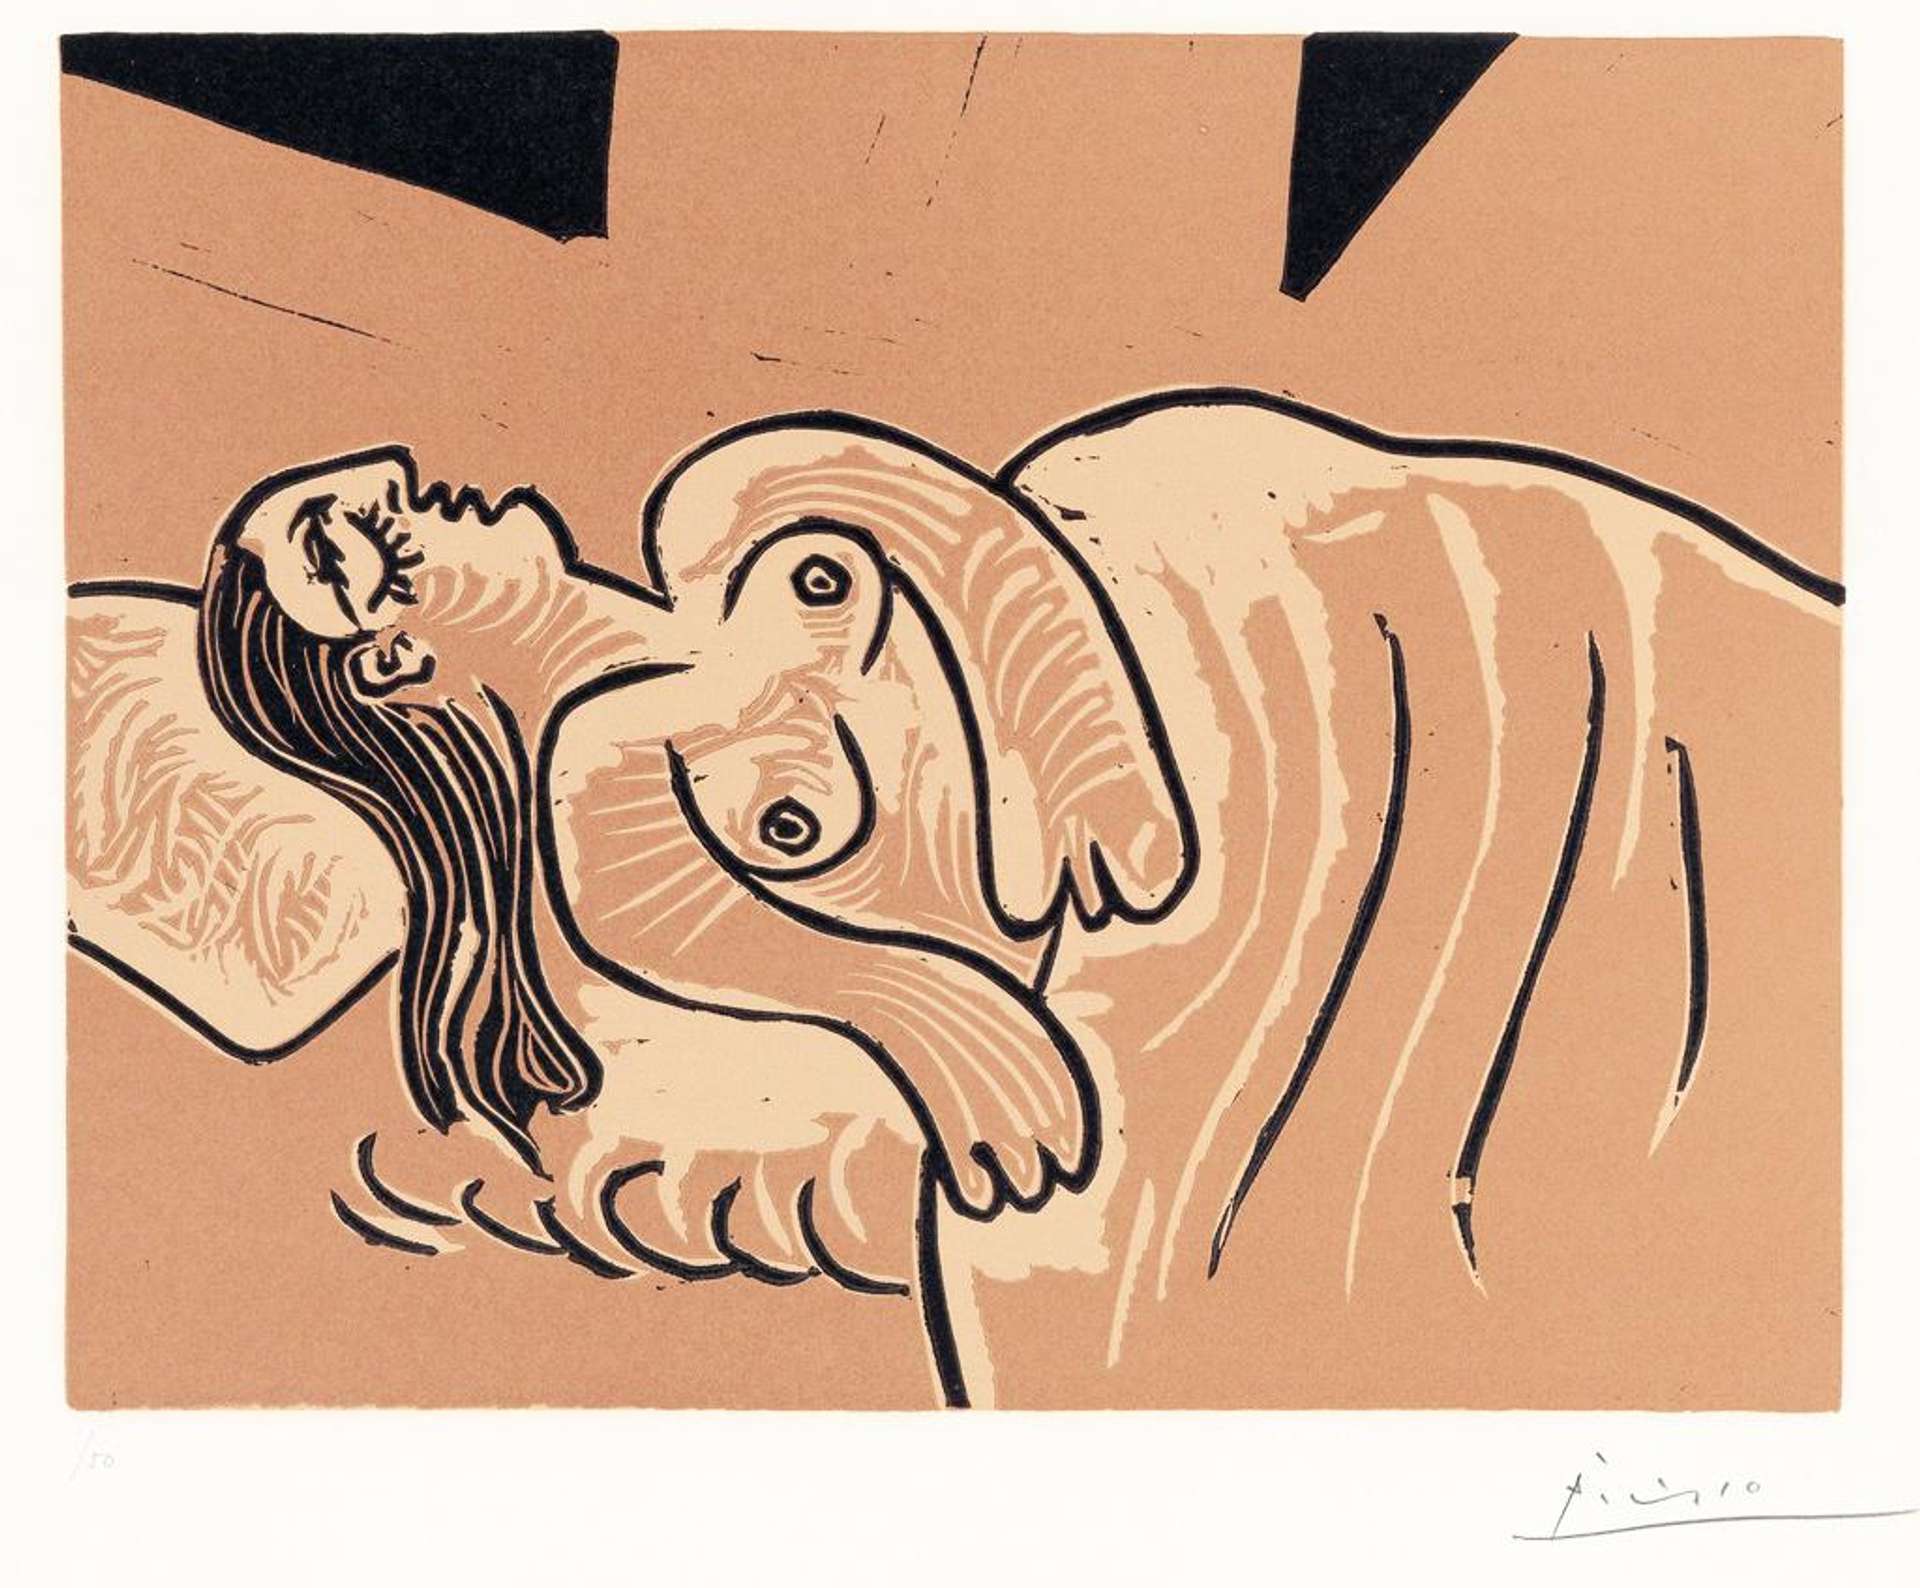 An image of the artwork Femme Endormie by Pablo Picasso. It shows a sleeping woman, with her breasts exposed, drawn in black and white against a beige background.